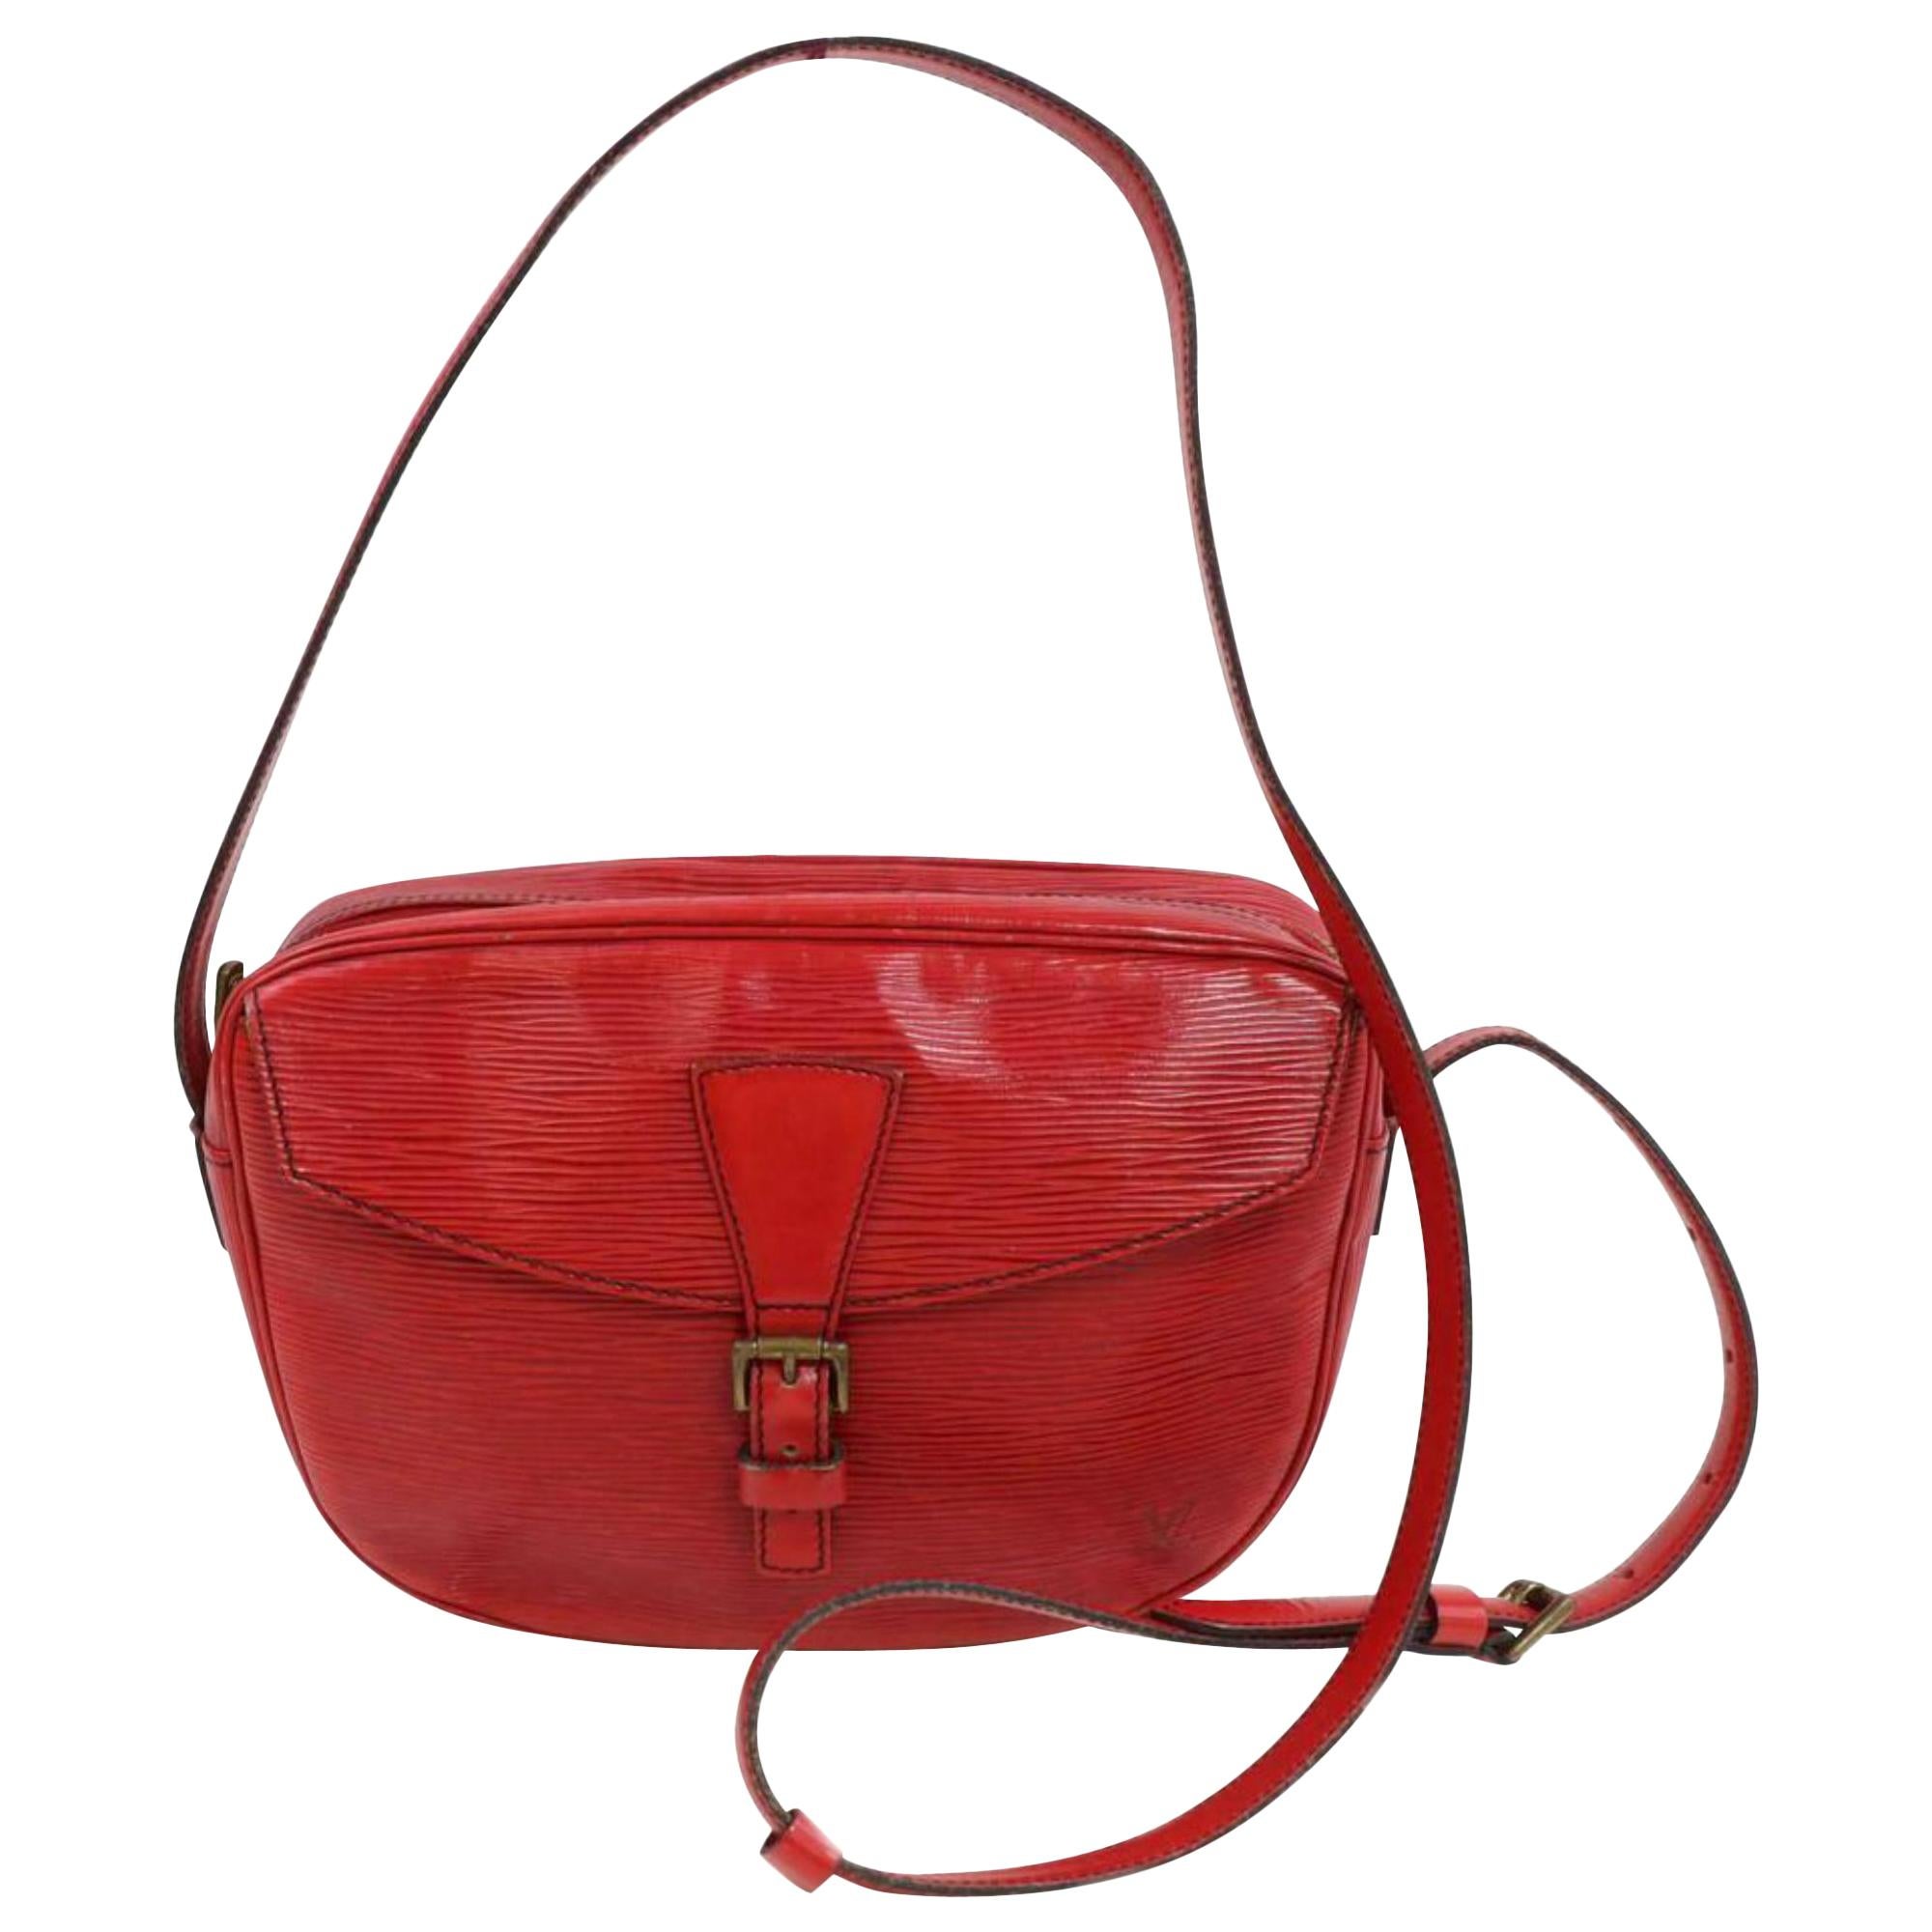 Louis Vuitton Jeune fille 870648 Red Epi Leather Cross Body Bag For Sale